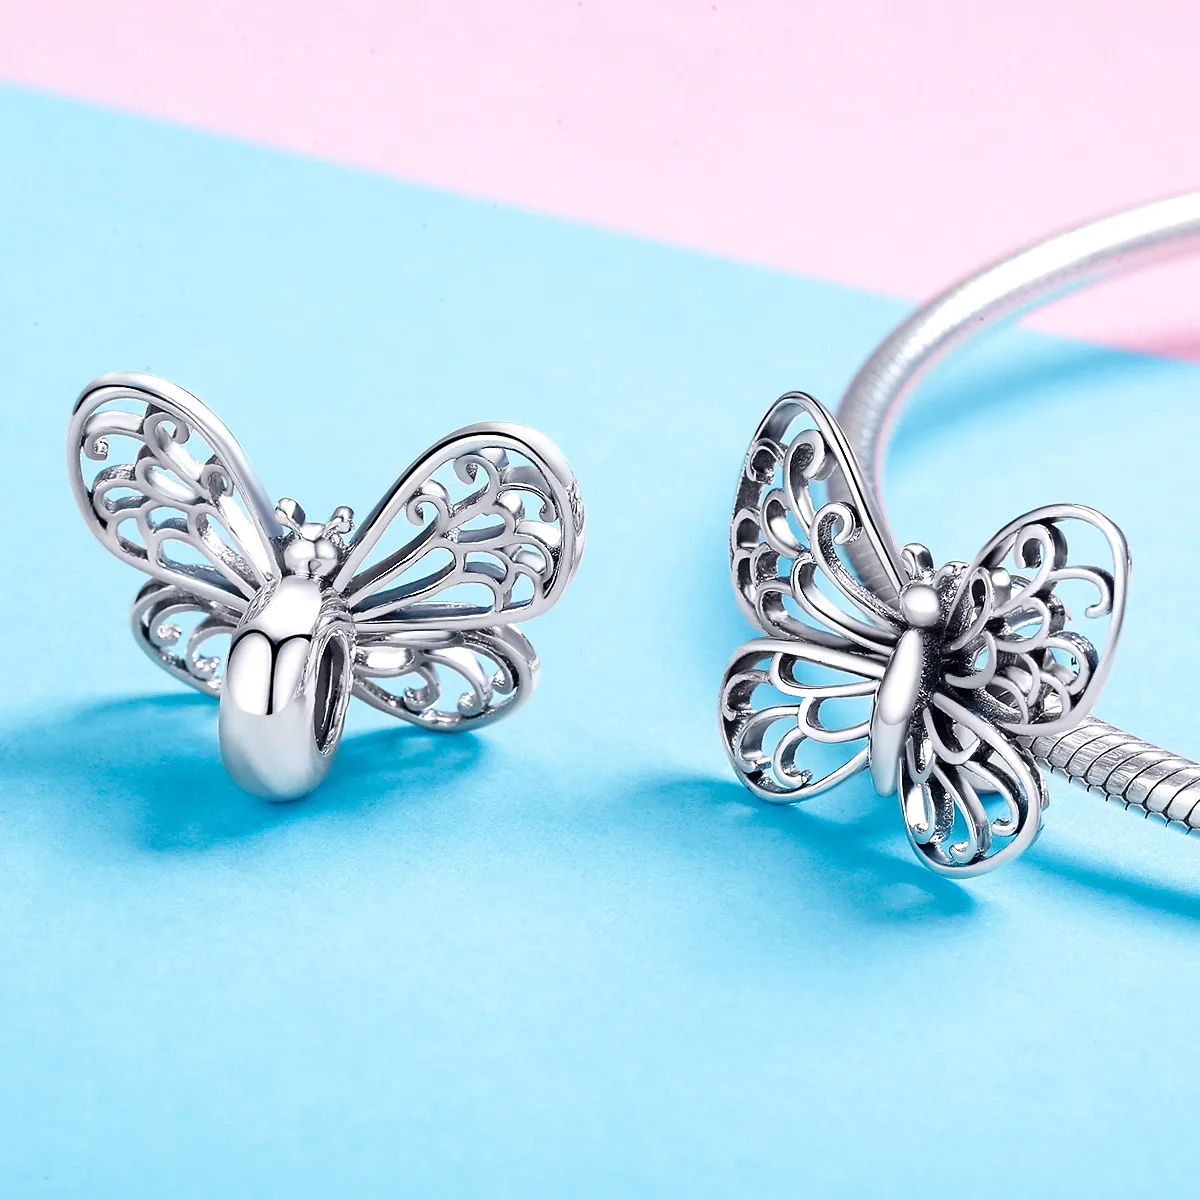 Pandora Style Silver Butterfly Charm - BSC062